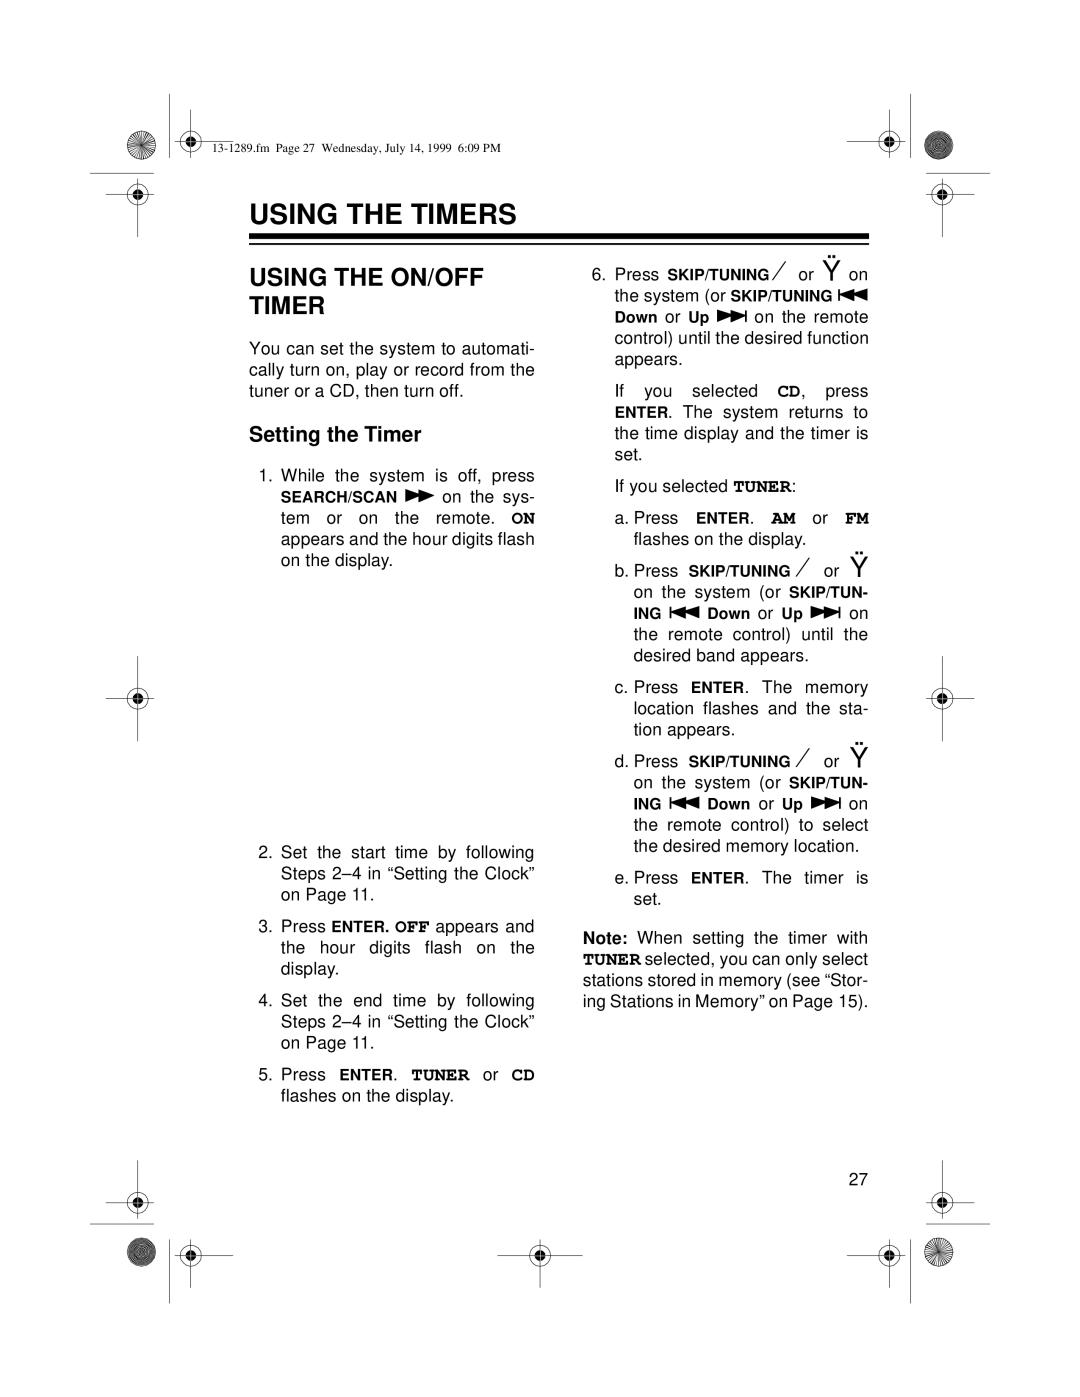 Optimus 742 owner manual Using The Timers, Using The On/Off Timer, Setting the Timer 